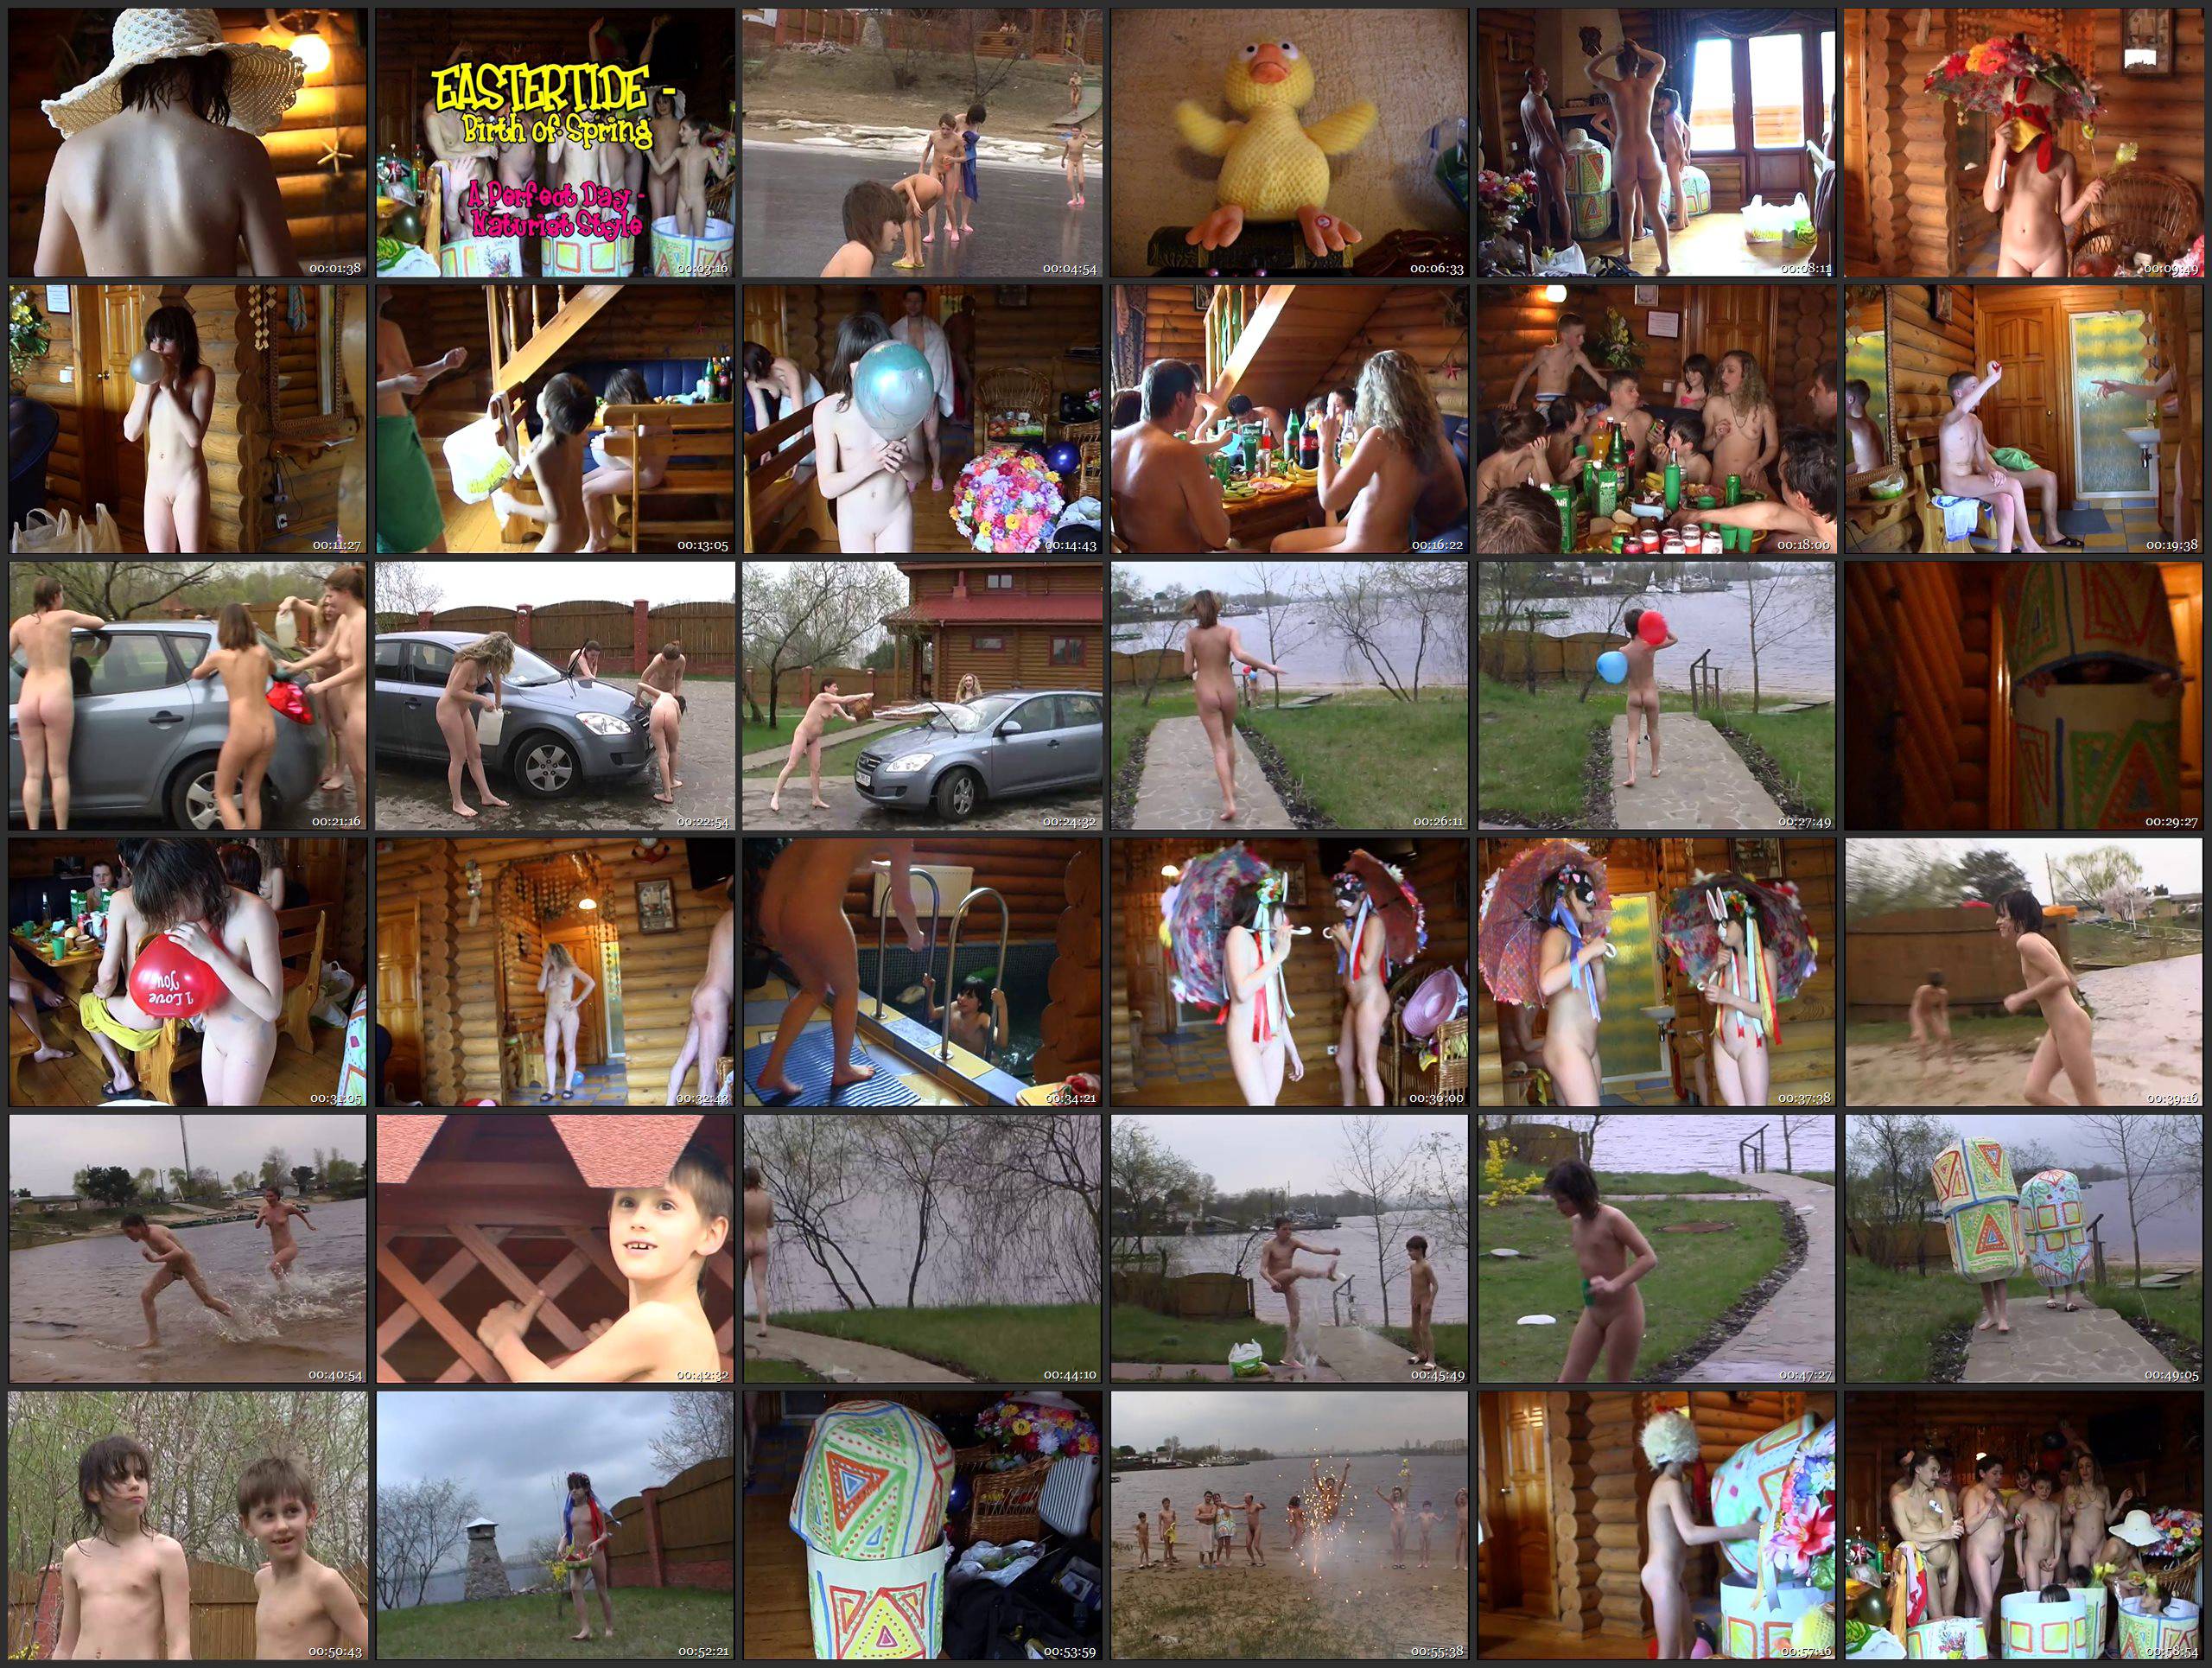 RussianBare.com-Eastertide - Birth of Spring. A Perfect Day - Naturist Style - Thumbnails